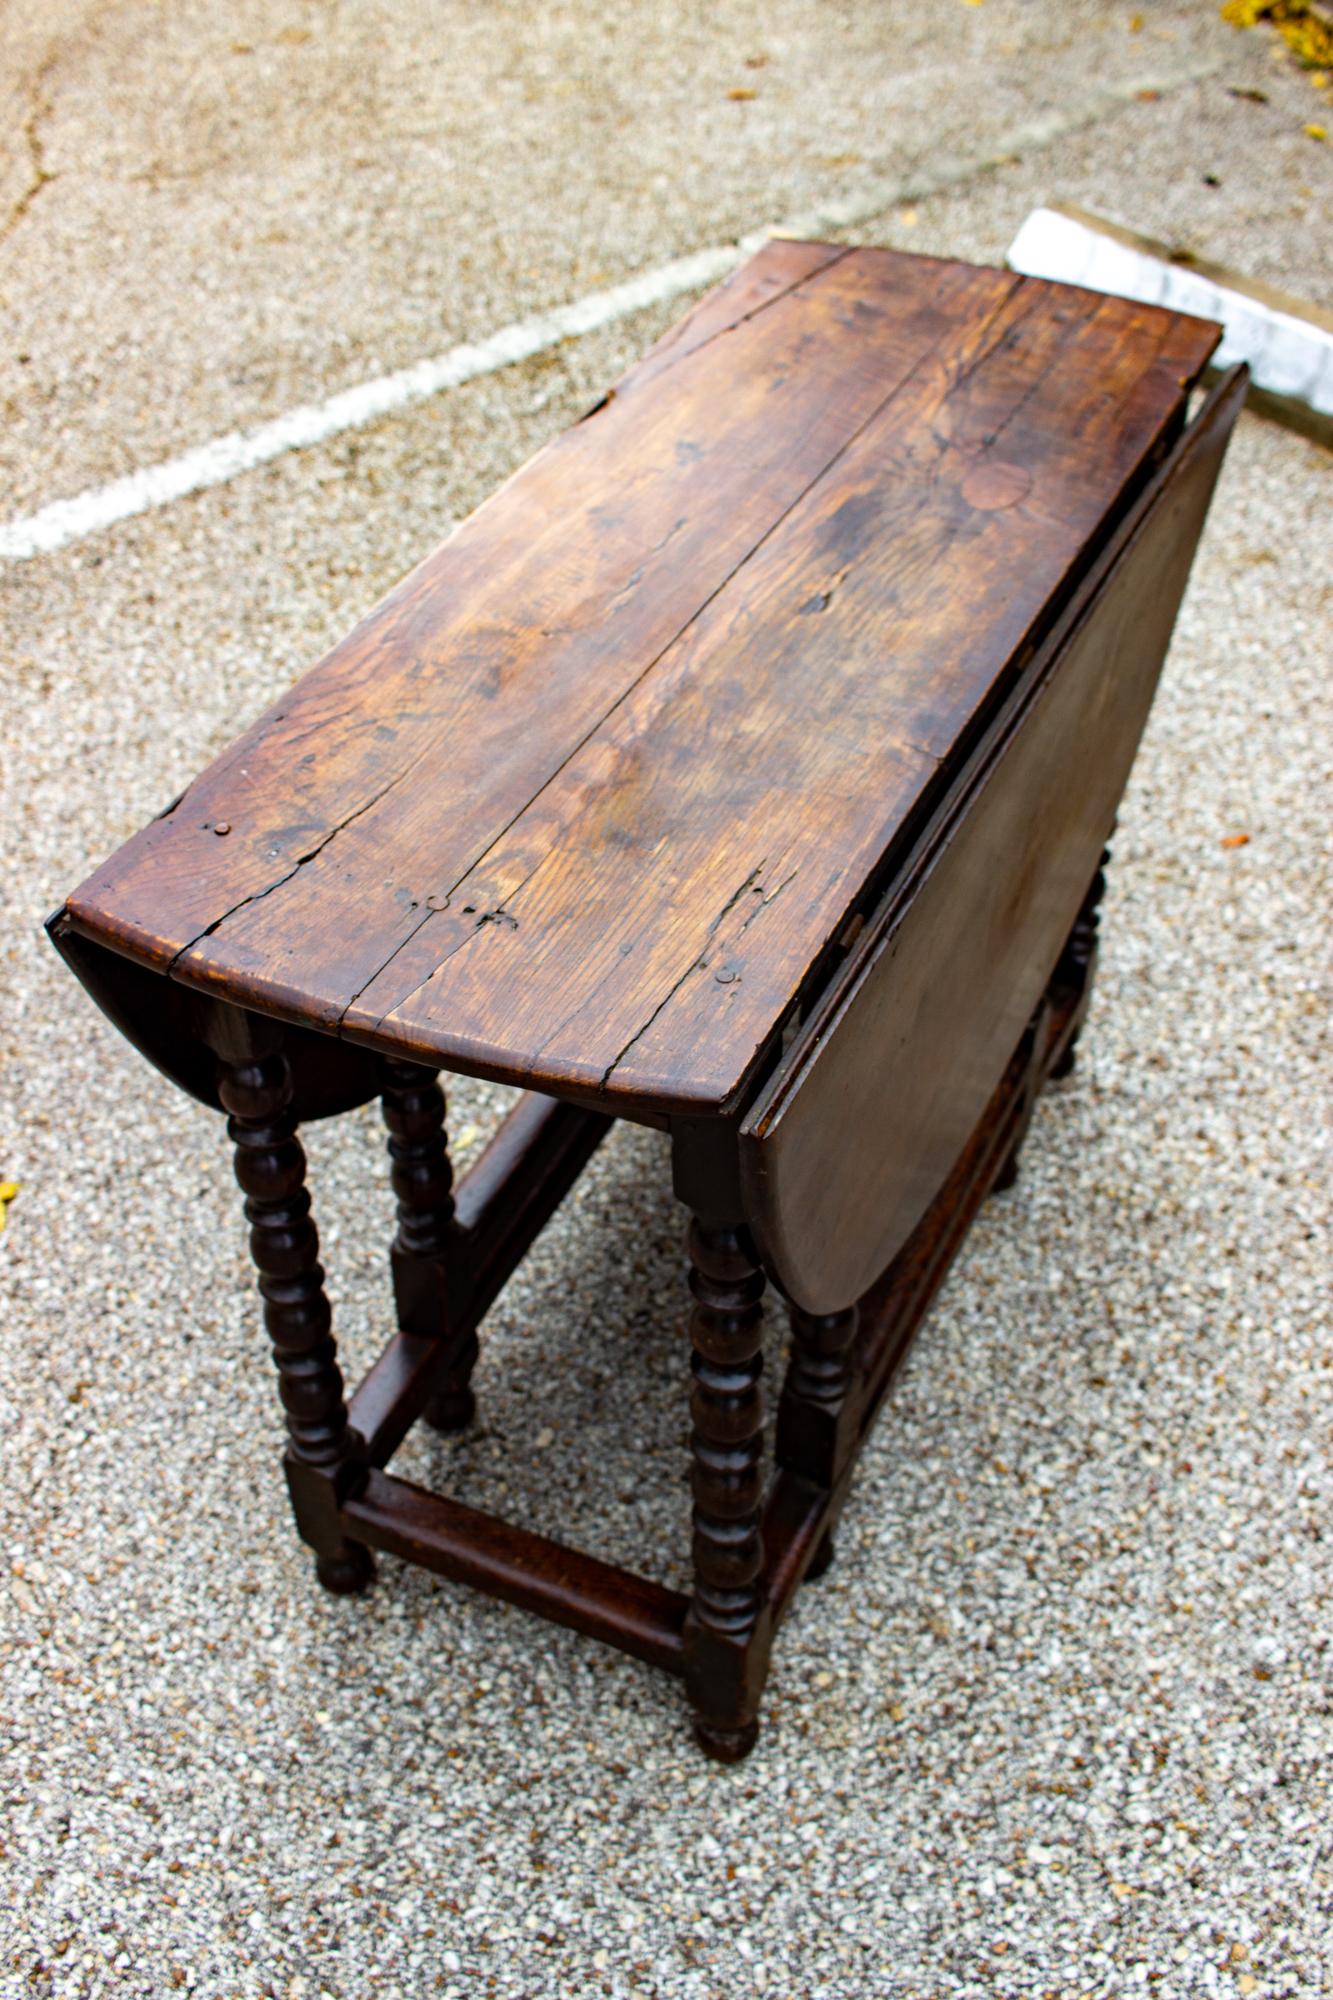 Hand-Carved 19th Century Oak Drop Leaf Gate Leg Table and Console with Drawer, circa 1840